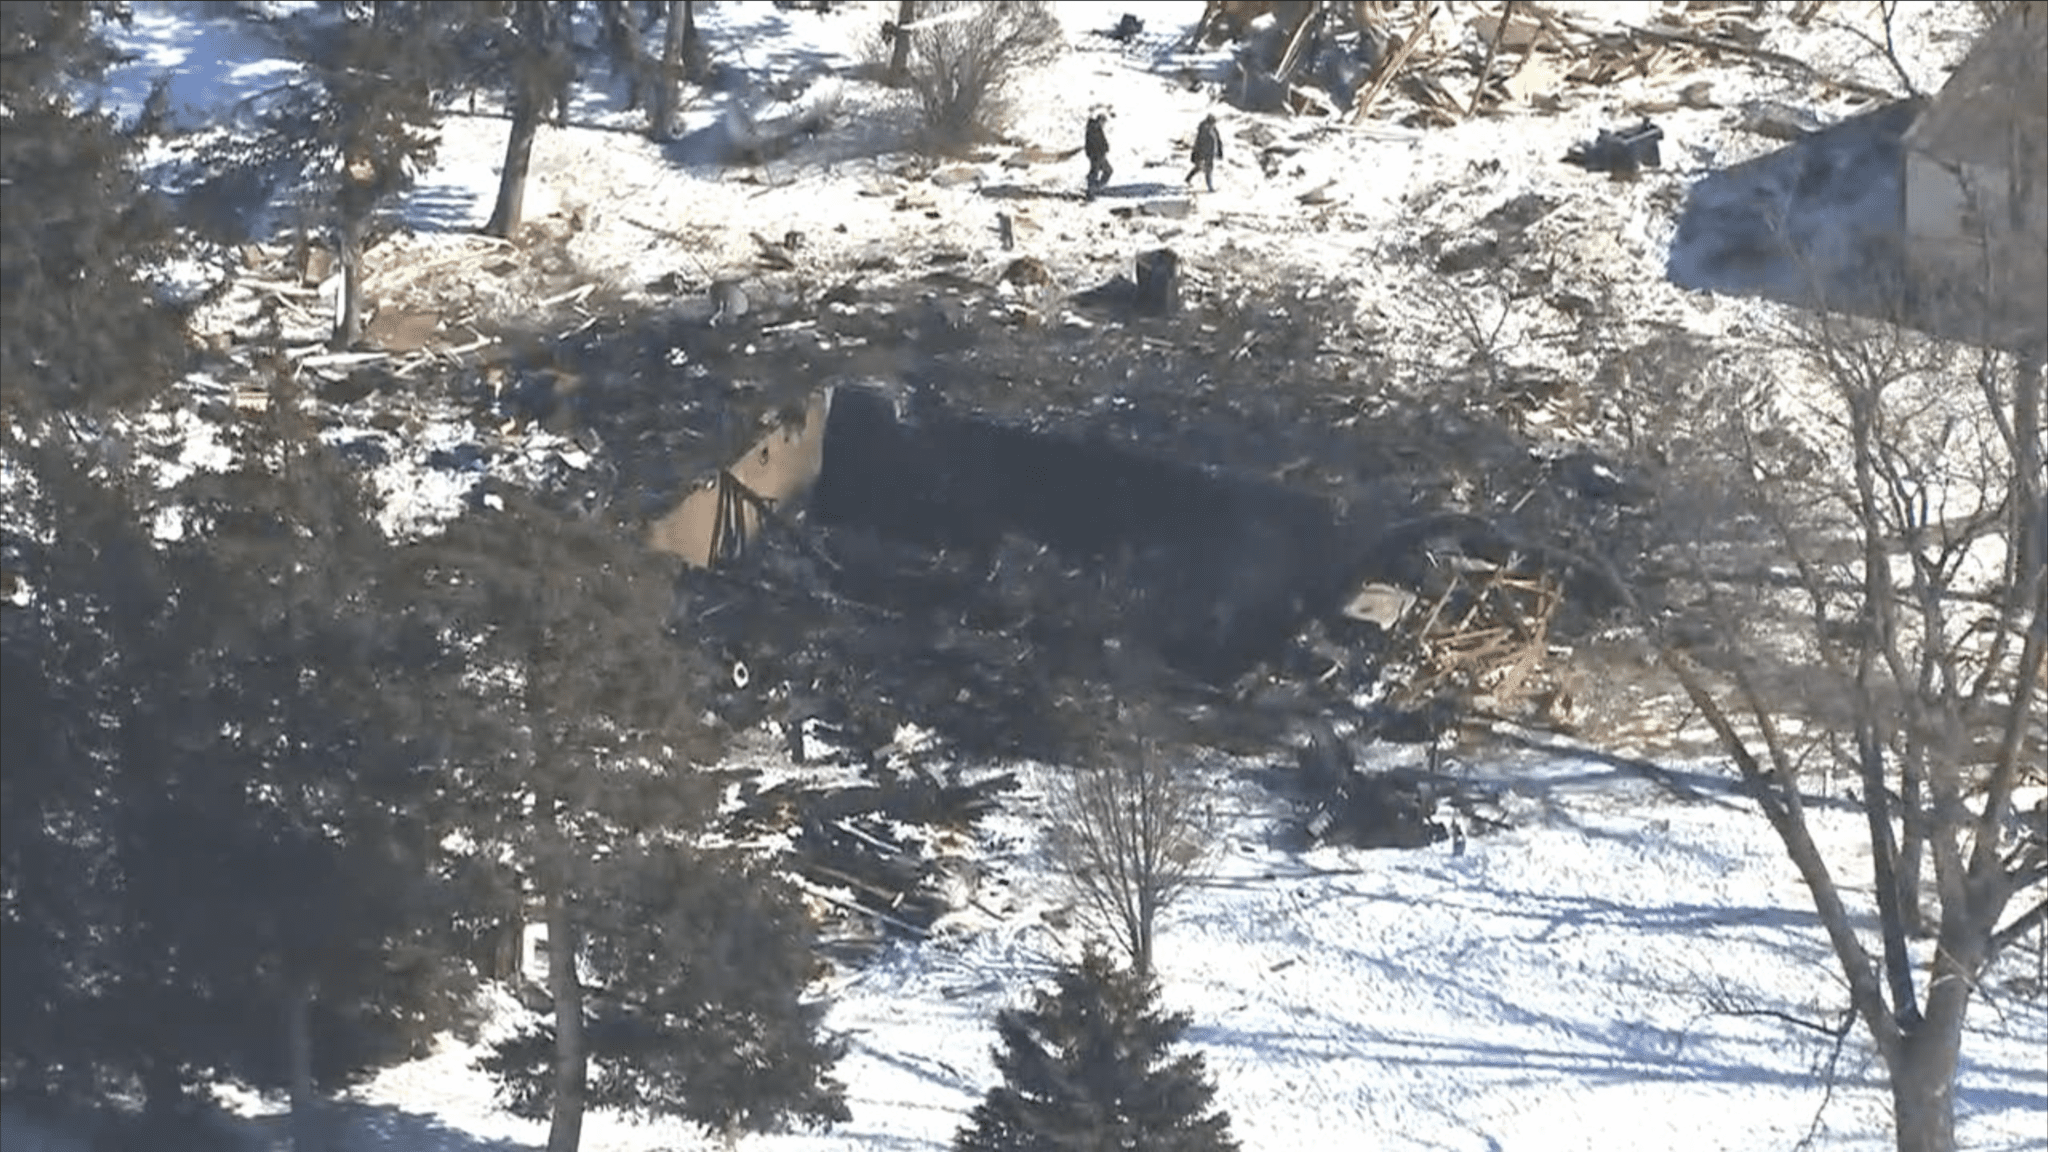 Aerial footage shows the charred remains of a home on Sunday, Feb. 27, 2022, the day after it exploded near Le Center, Minnesota. A deceased woman was found in the basement of the wrecked house.